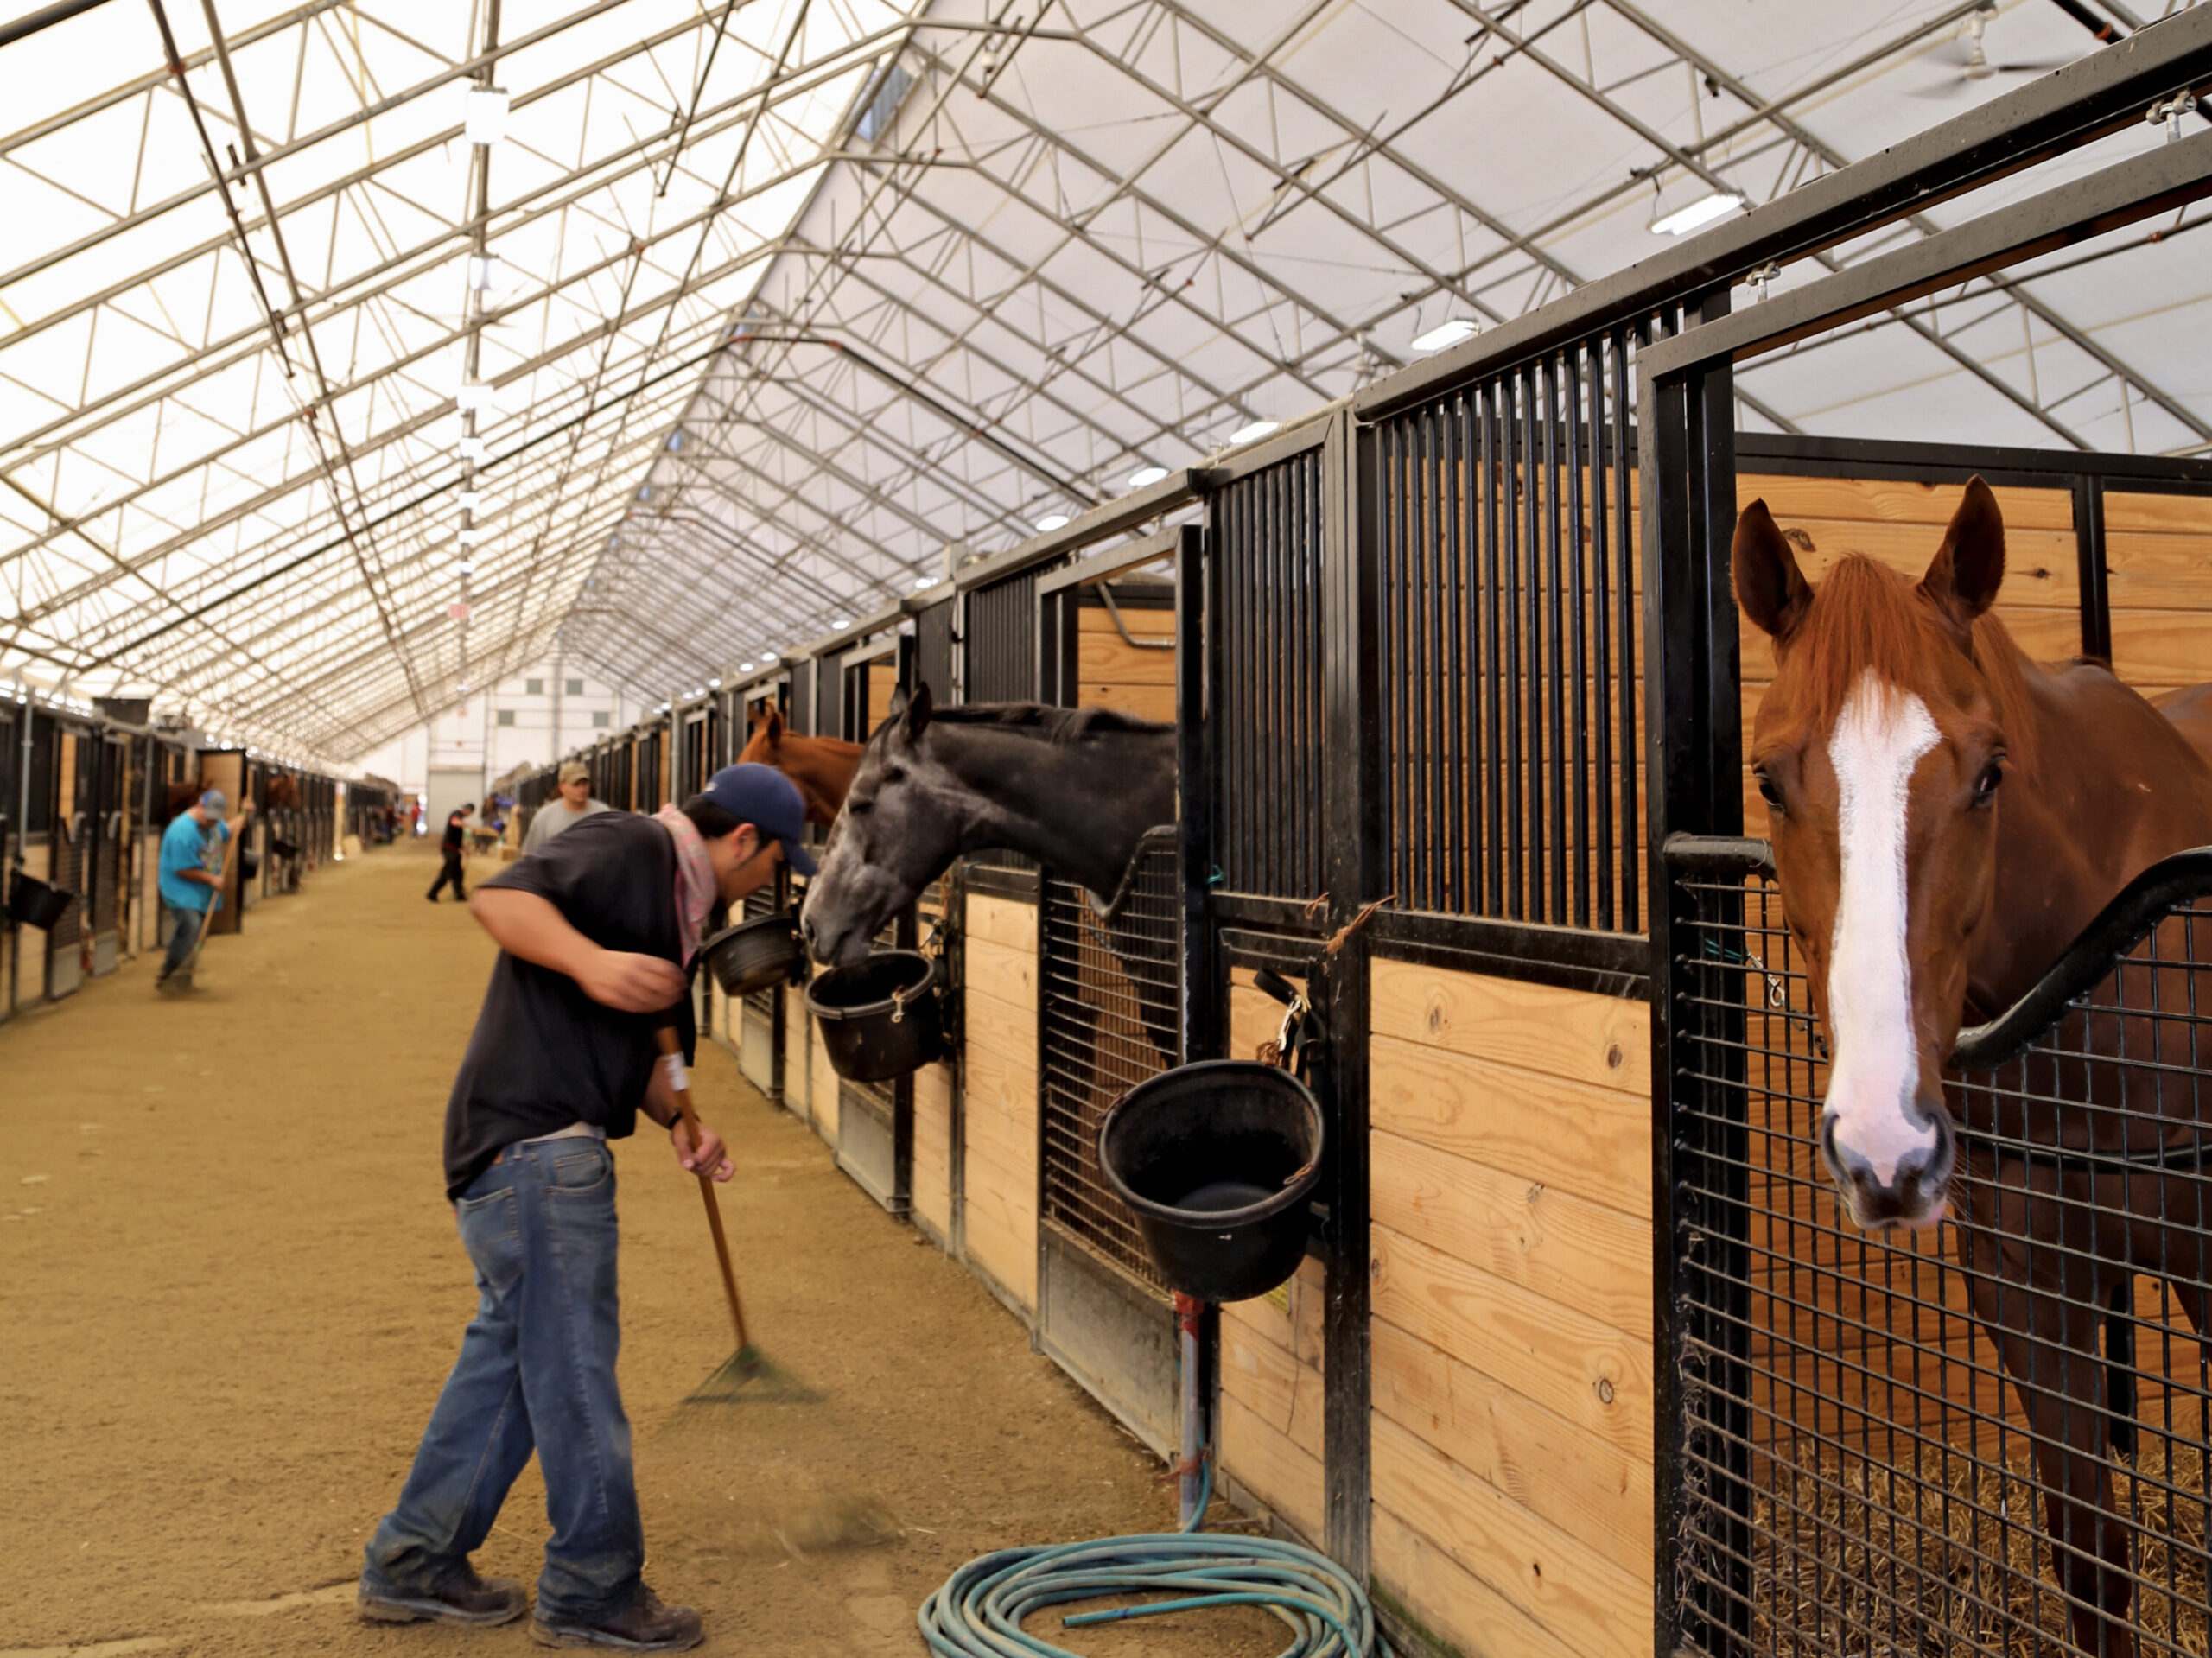 Working cleaning horse stalls under a ClearSpan Structure